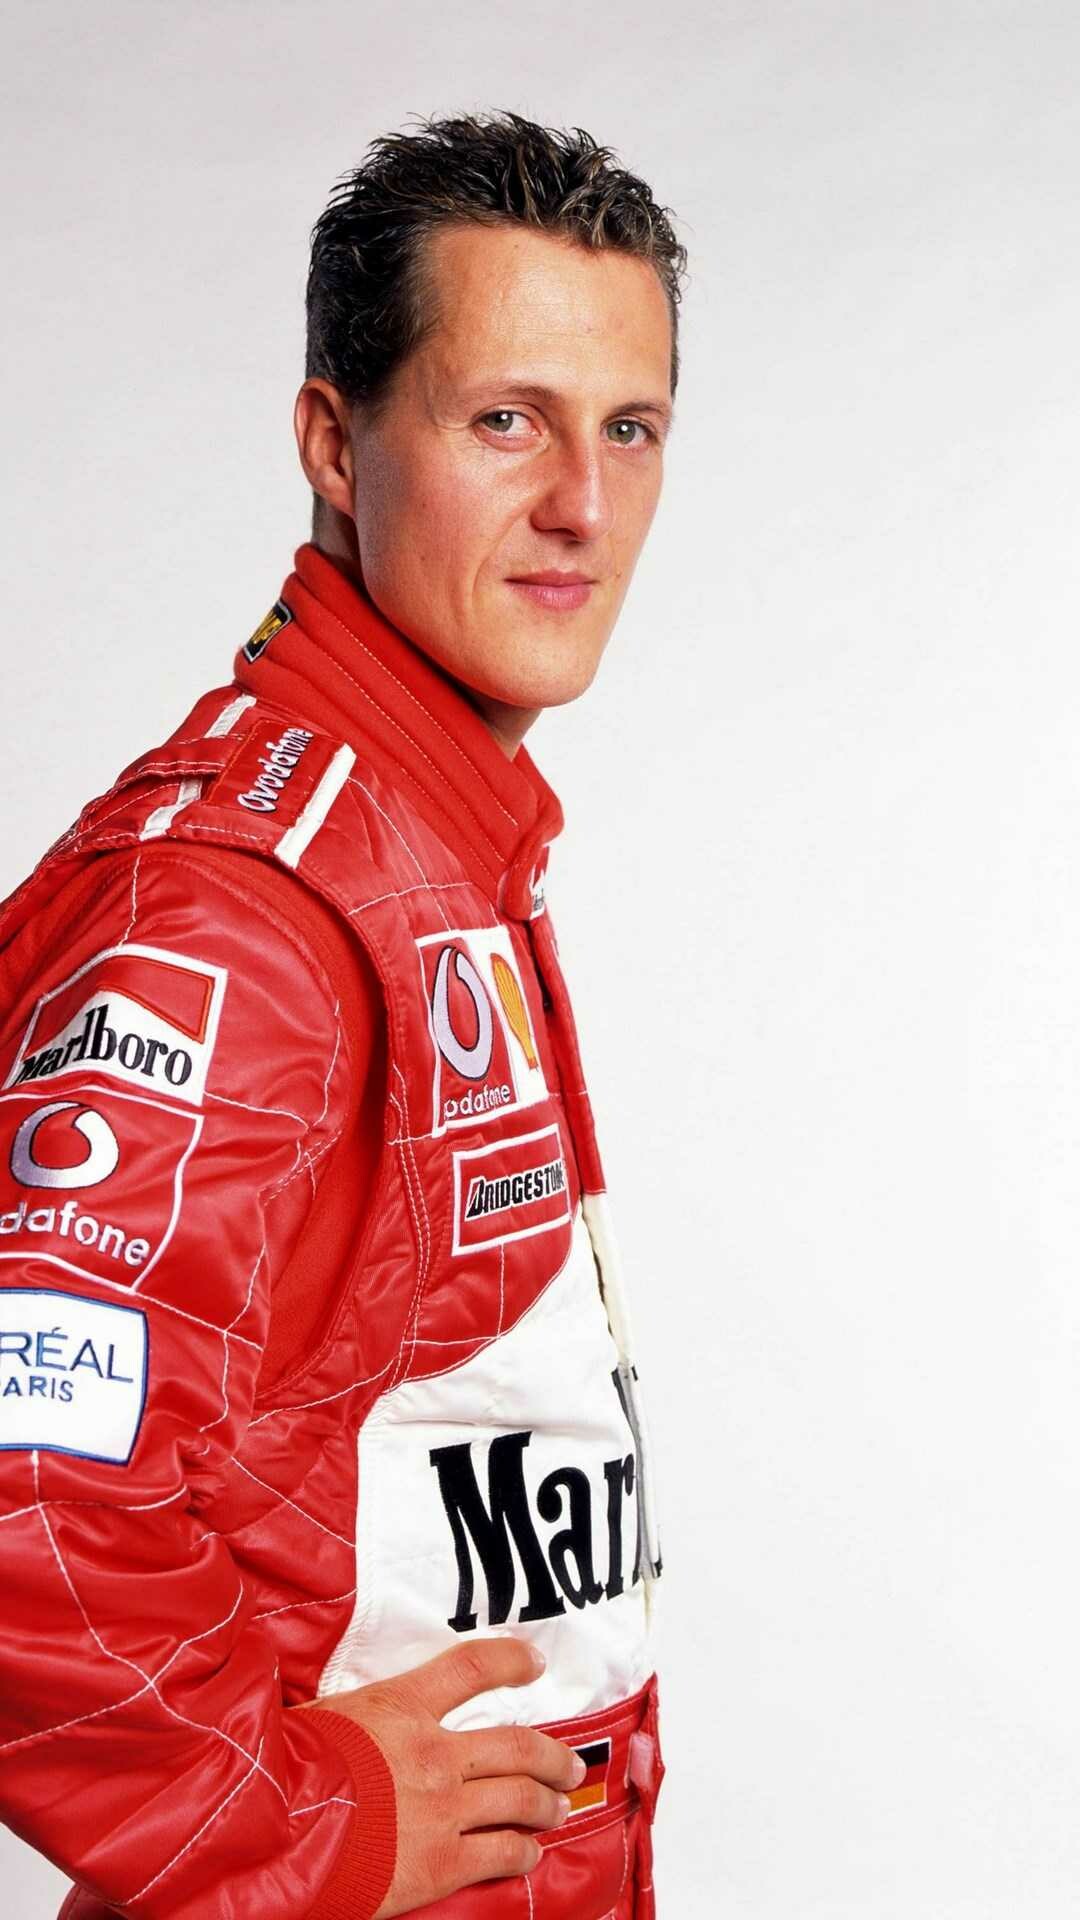 Michael Schumacher: He competed with Jacques Villeneuve for the Formula One title in 1997. 1080x1920 Full HD Background.